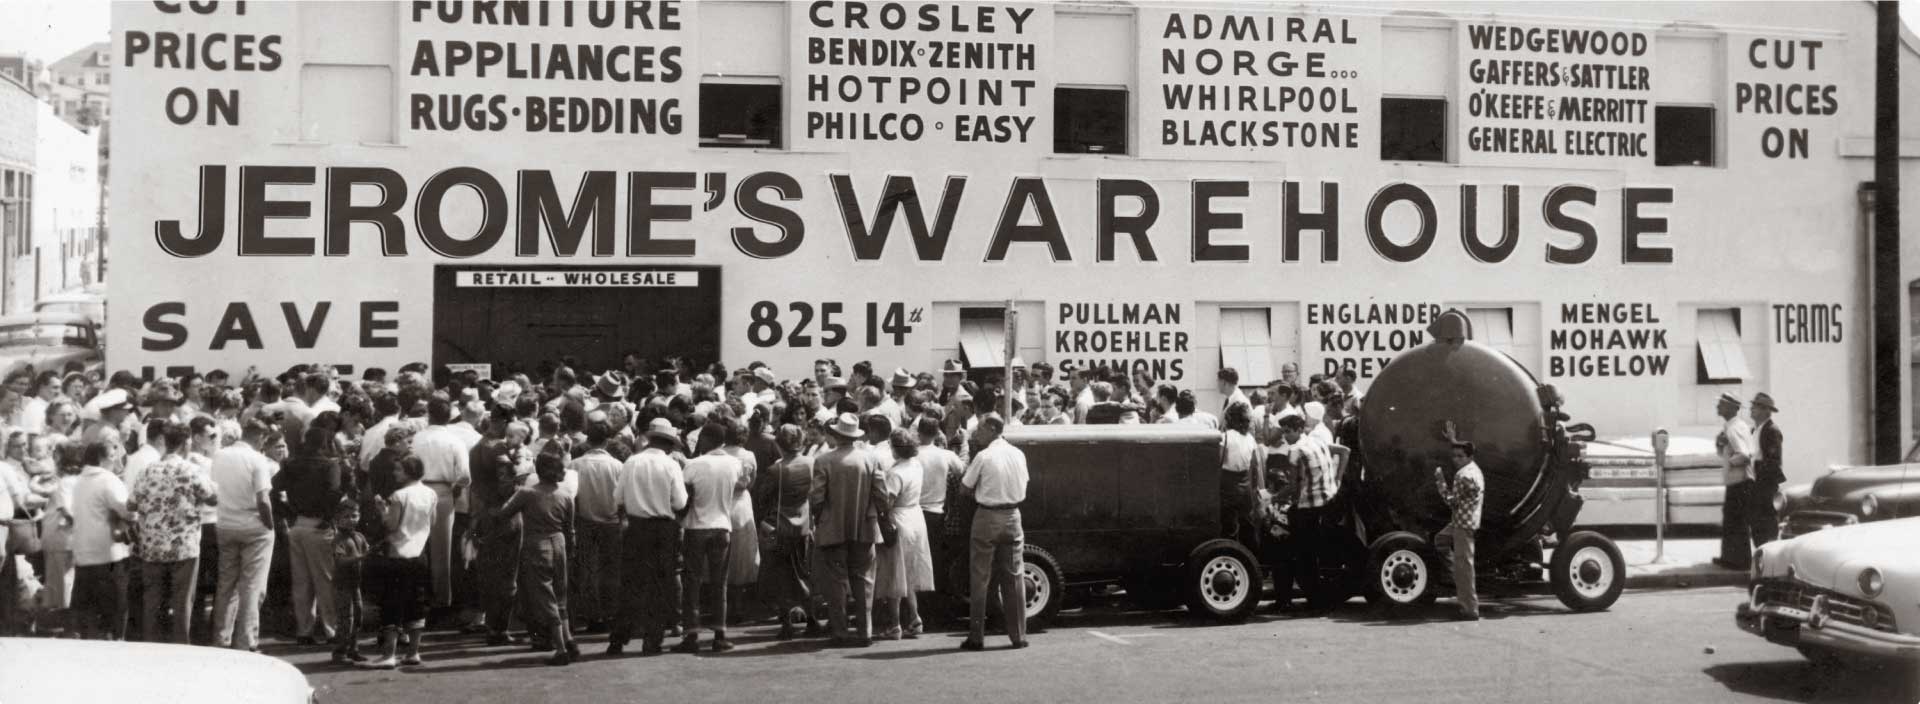 Jerome's Warehouse in 1954